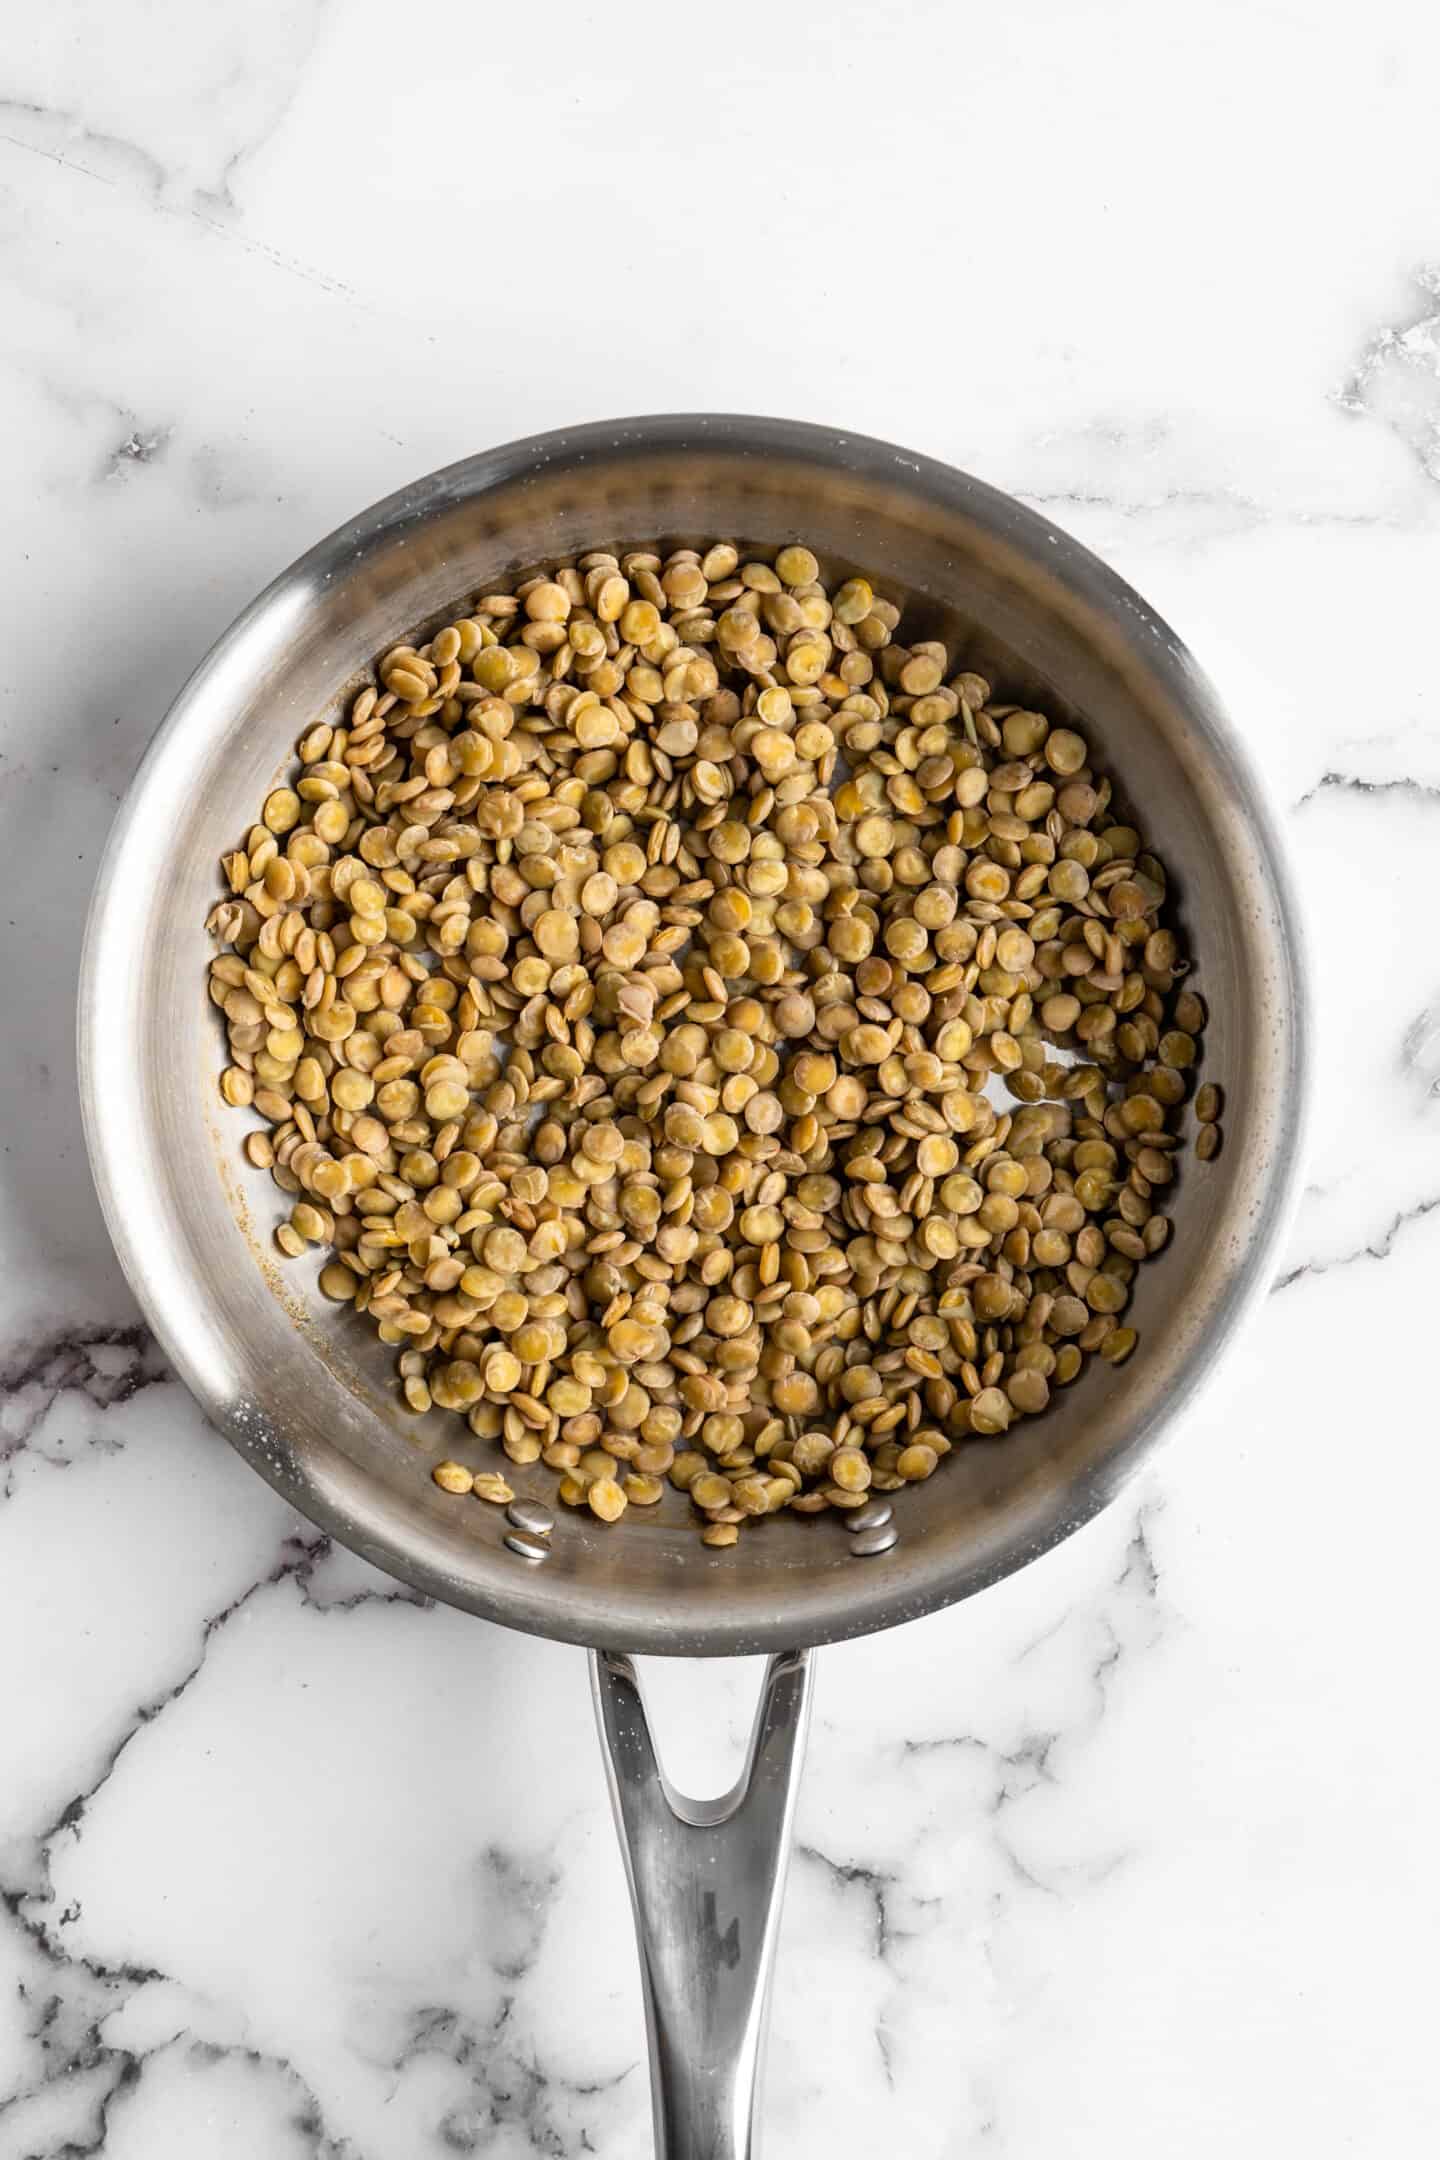 Overhead view of lentils in small pan